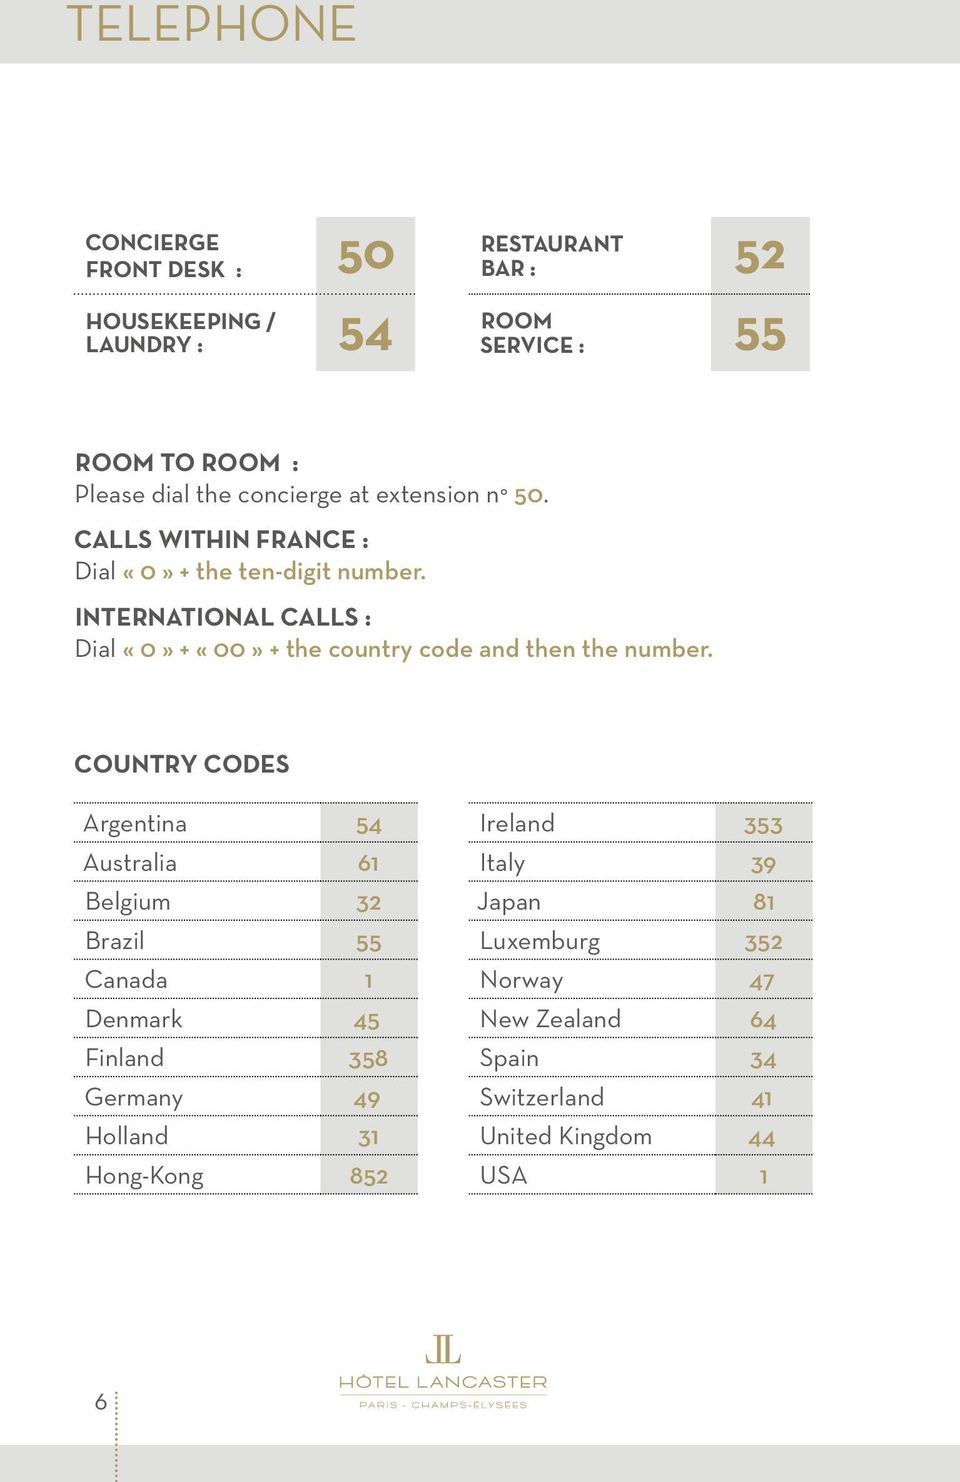 International Calls : Dial «0» + «00» + the country code and then the number.